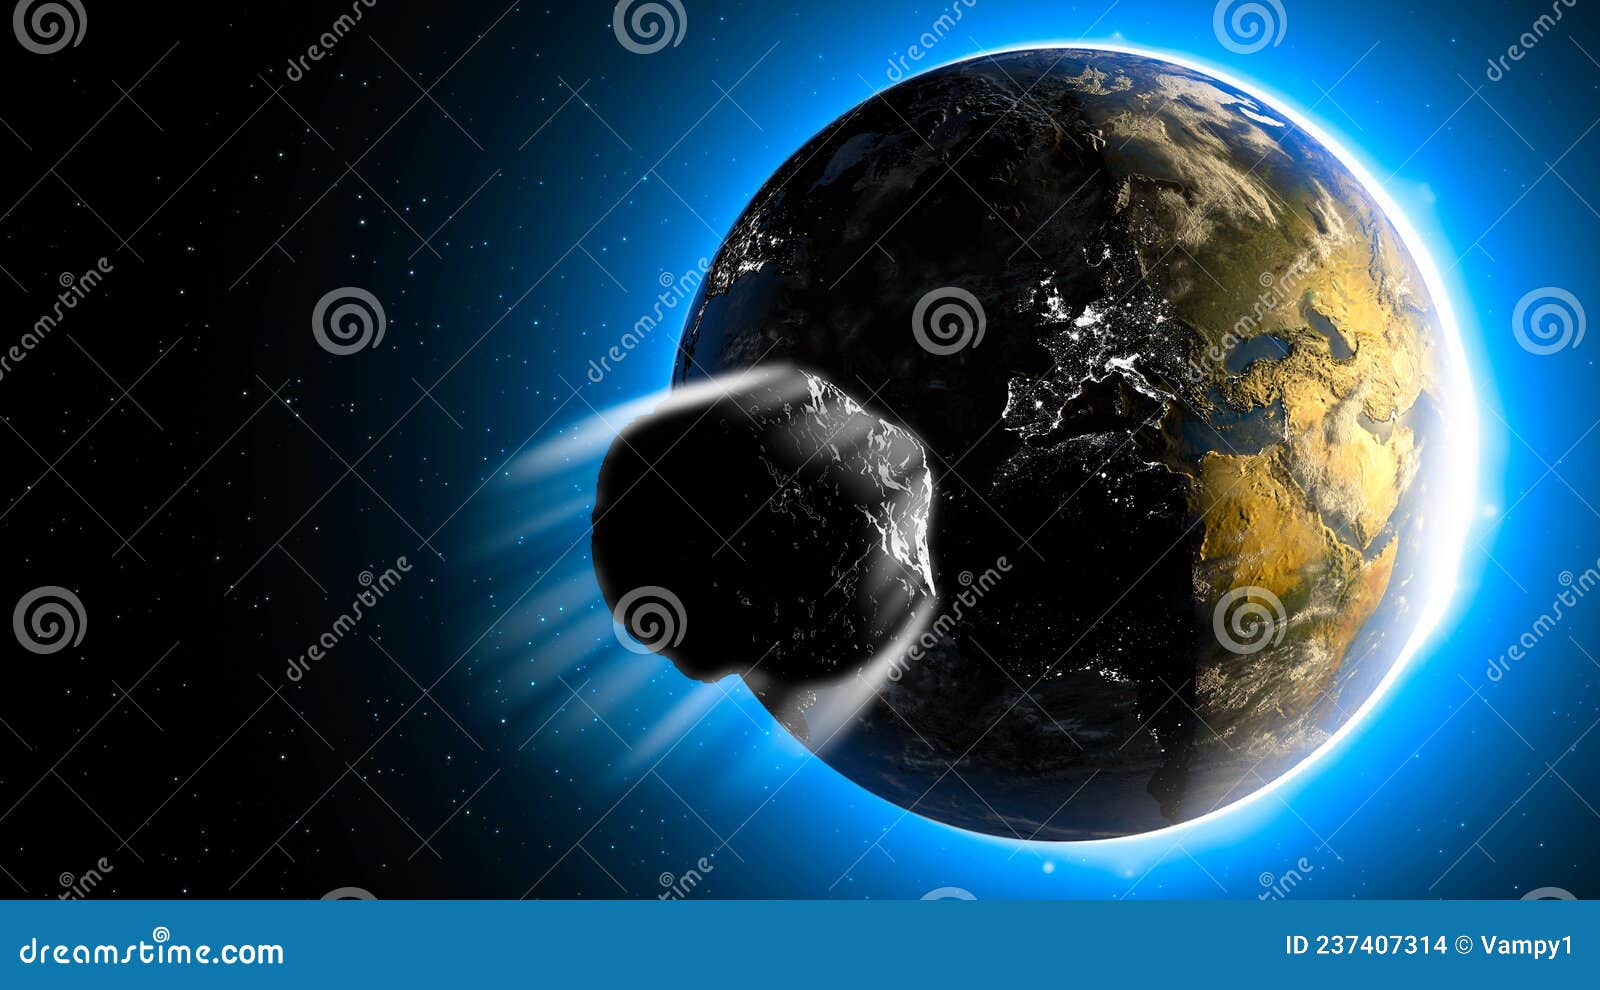 asteroid, meteorite hitting the earth. earth`s atmosphere crossed by a meteorite. collision course